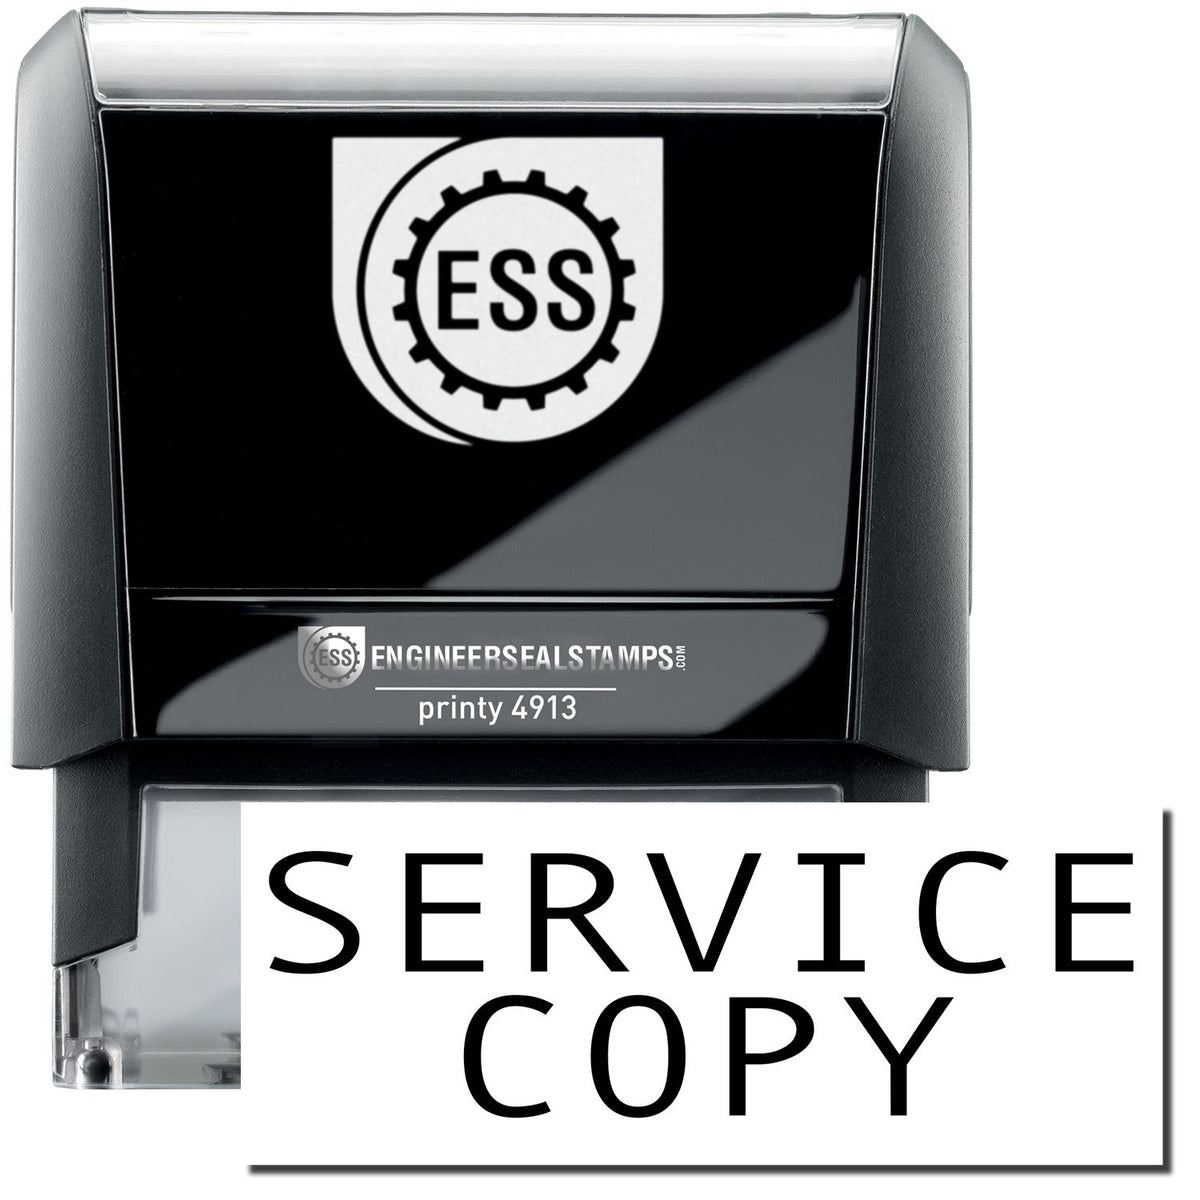 A self-inking stamp with a stamped image showing how the text &quot;SERVICE COPY&quot; in a large bold font is displayed by it.